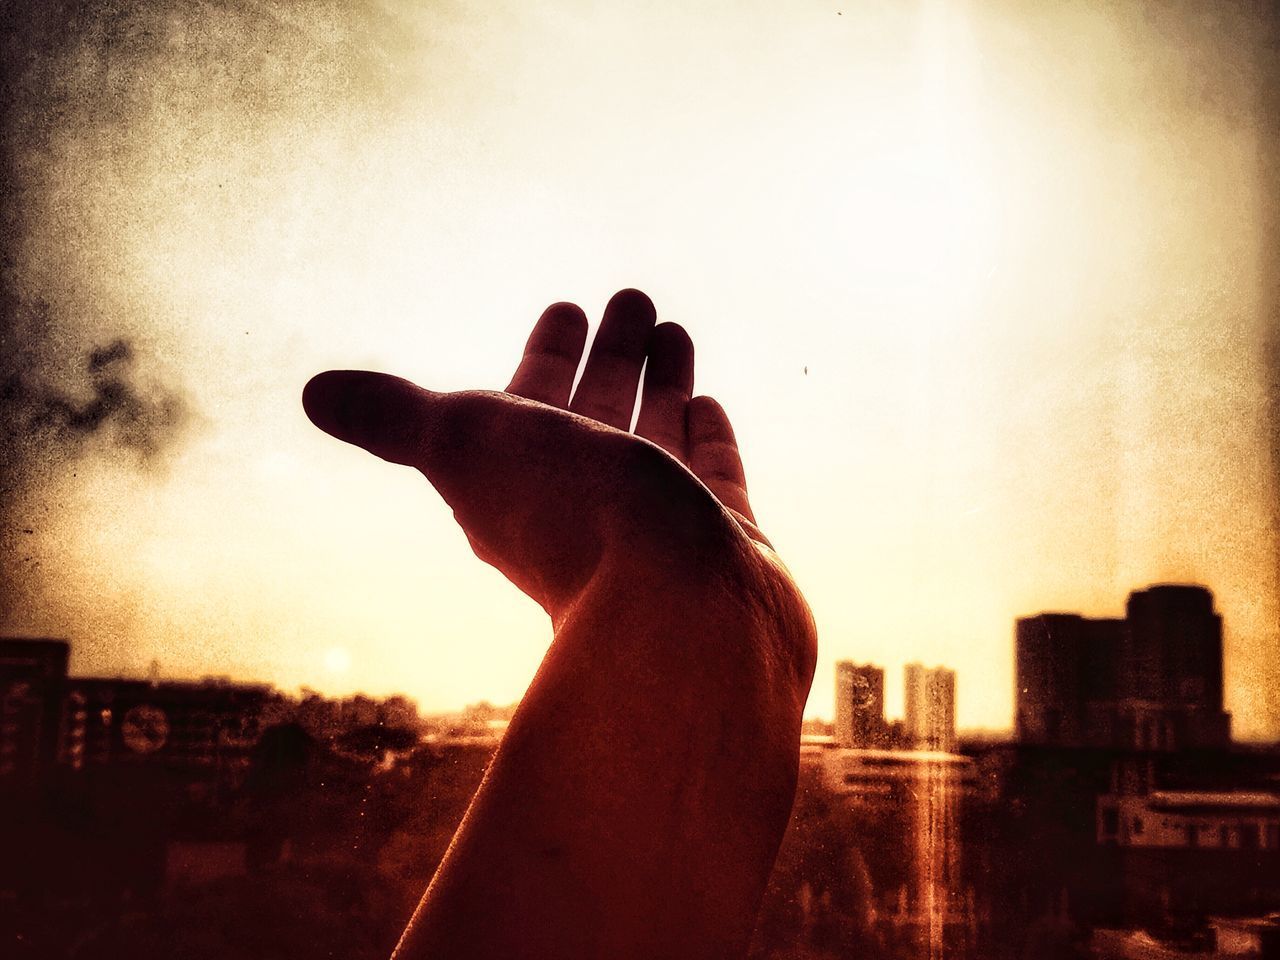 CLOSE-UP OF SILHOUETTE HAND AGAINST SKY